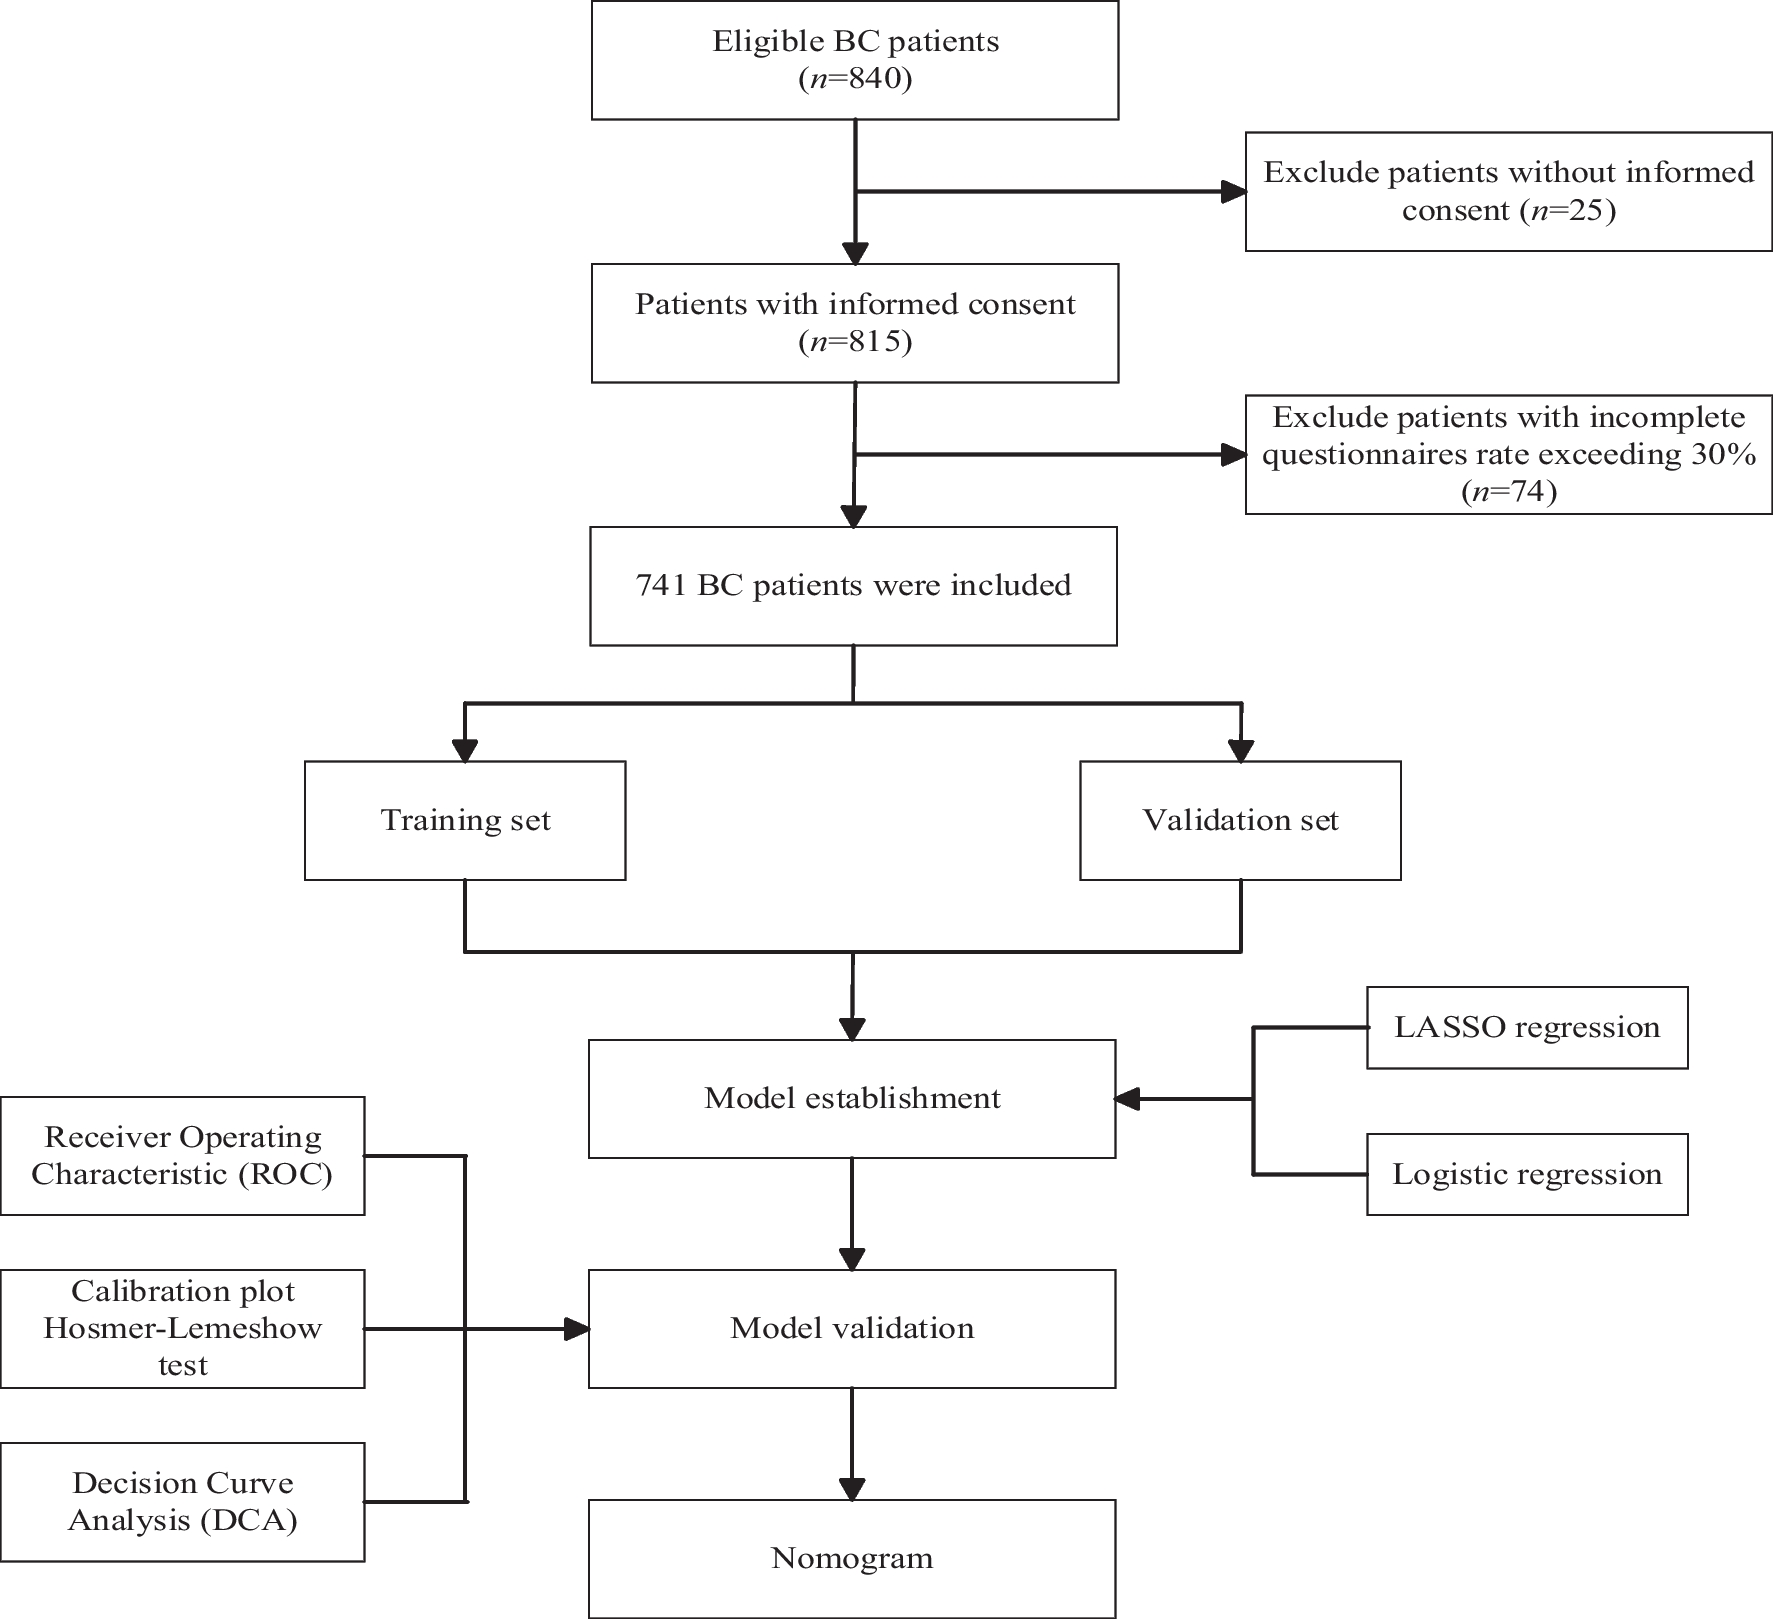 Construction and validation of a risk-prediction model for chemotherapy-related cognitive impairment in patients with breast cancer